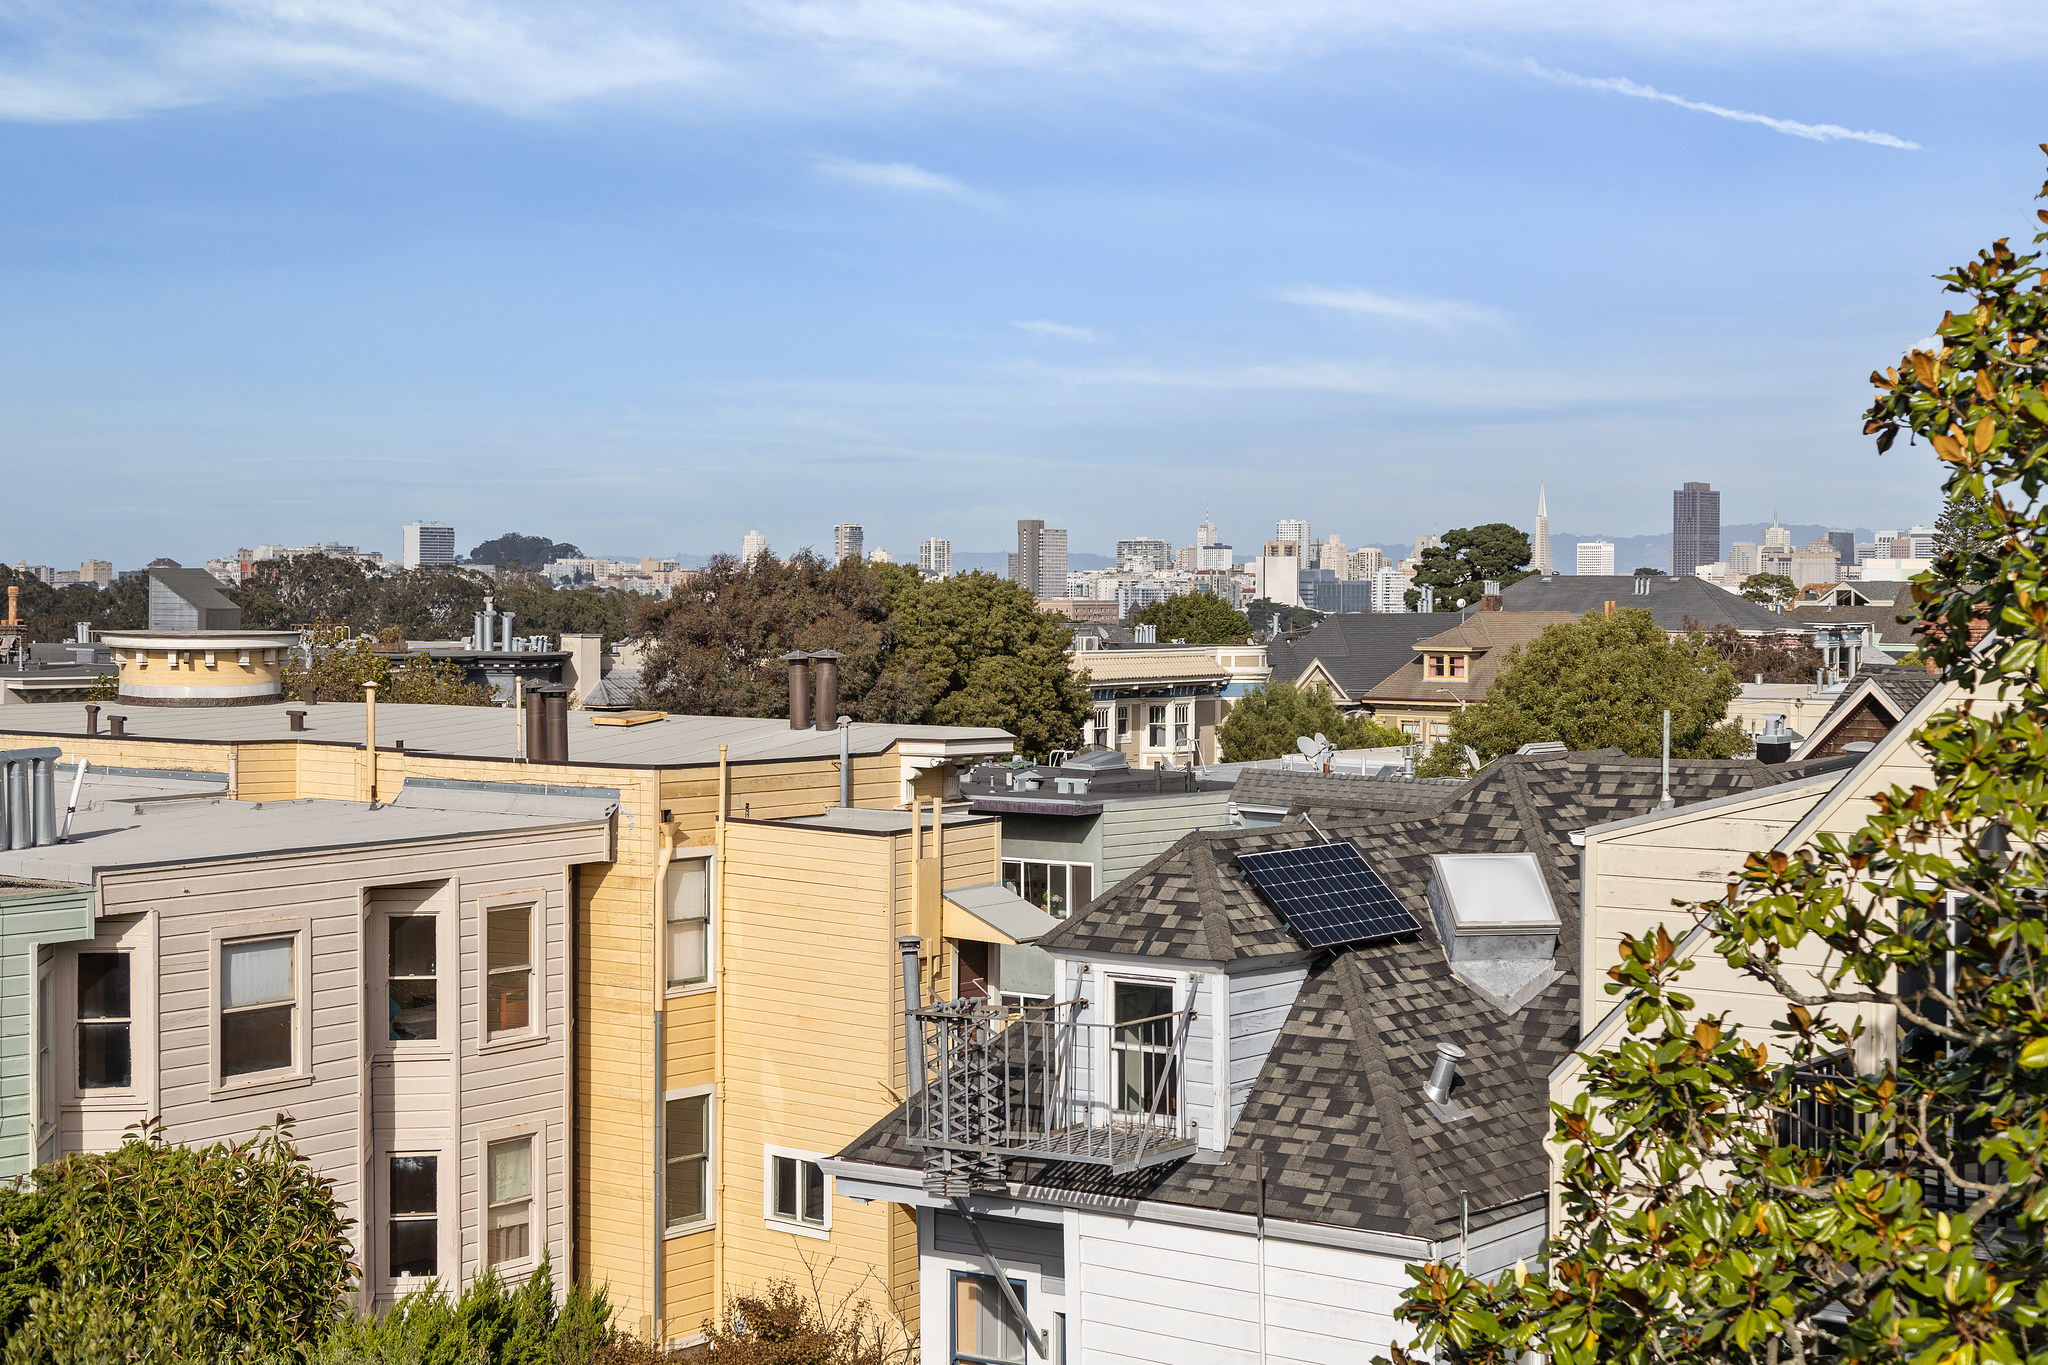 Property Photo: Cheery roof-tops and a blue sky is featured with a view of city